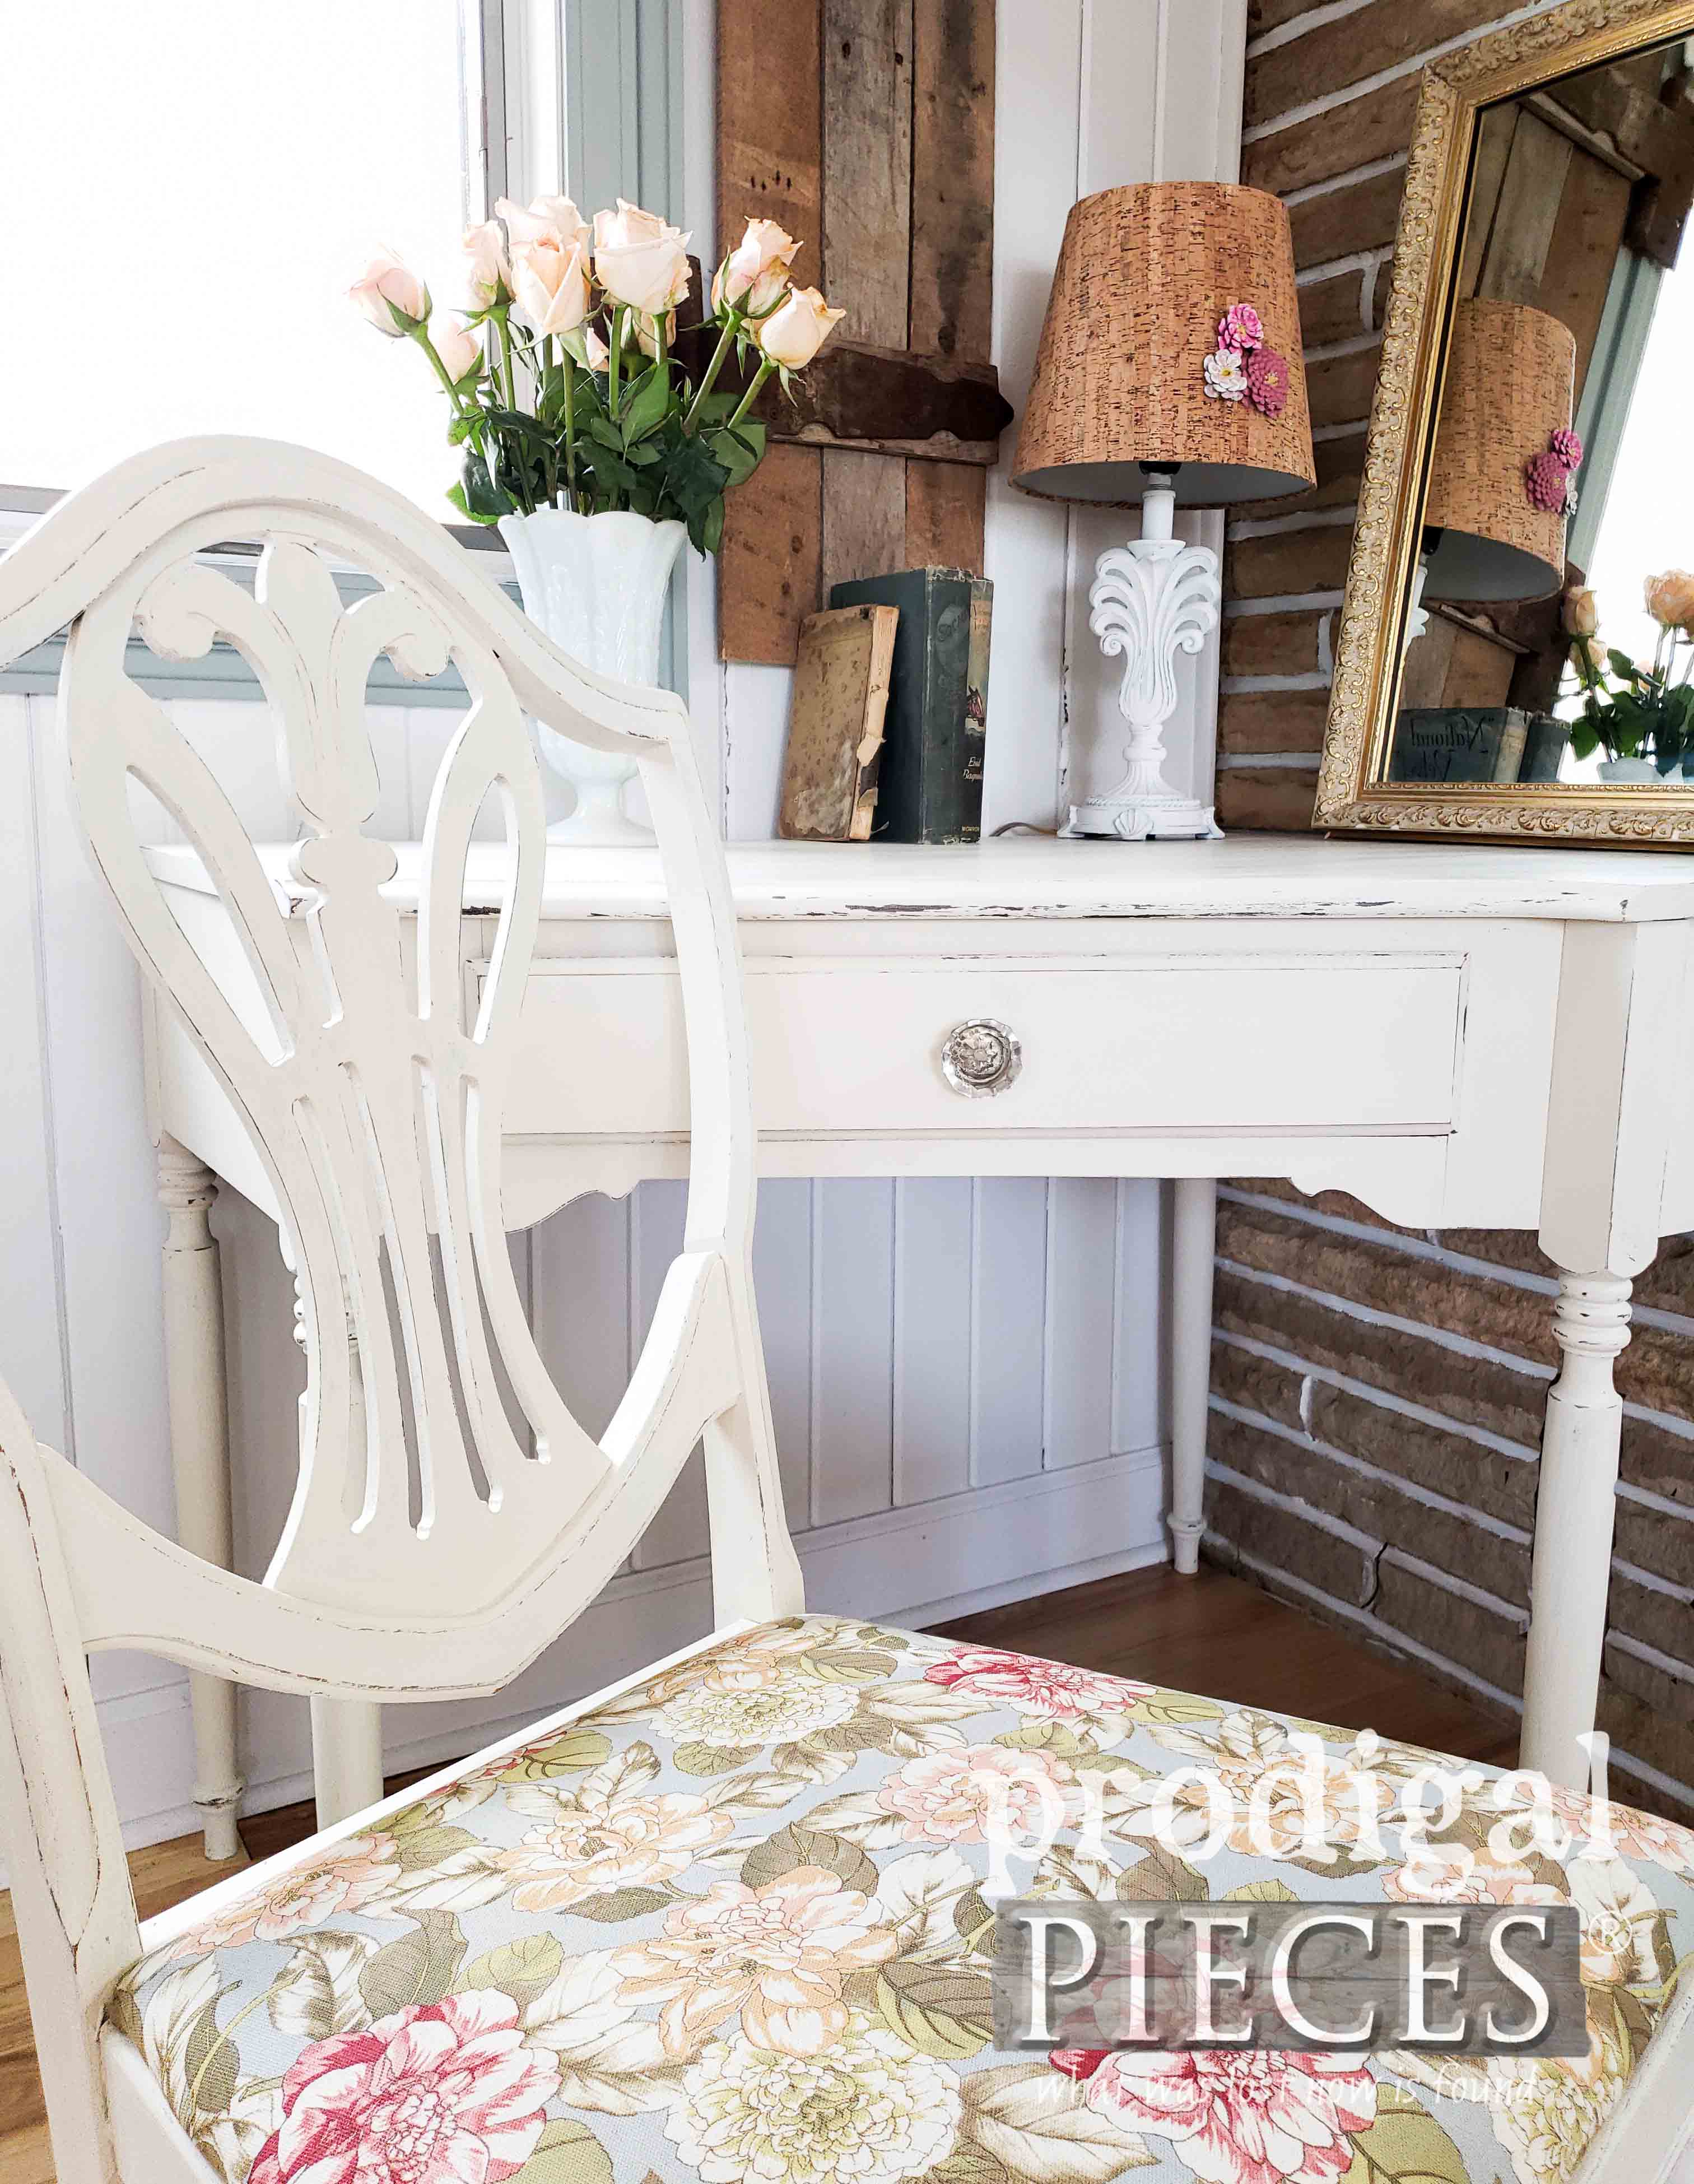 Vintage White Corner Writing Desk with Chair for Shabby Chic Style Decor by Larissa of Prodigal Pieces | prodigalpieces.com #prodigalpieces #diy #furniture #home #homedecor